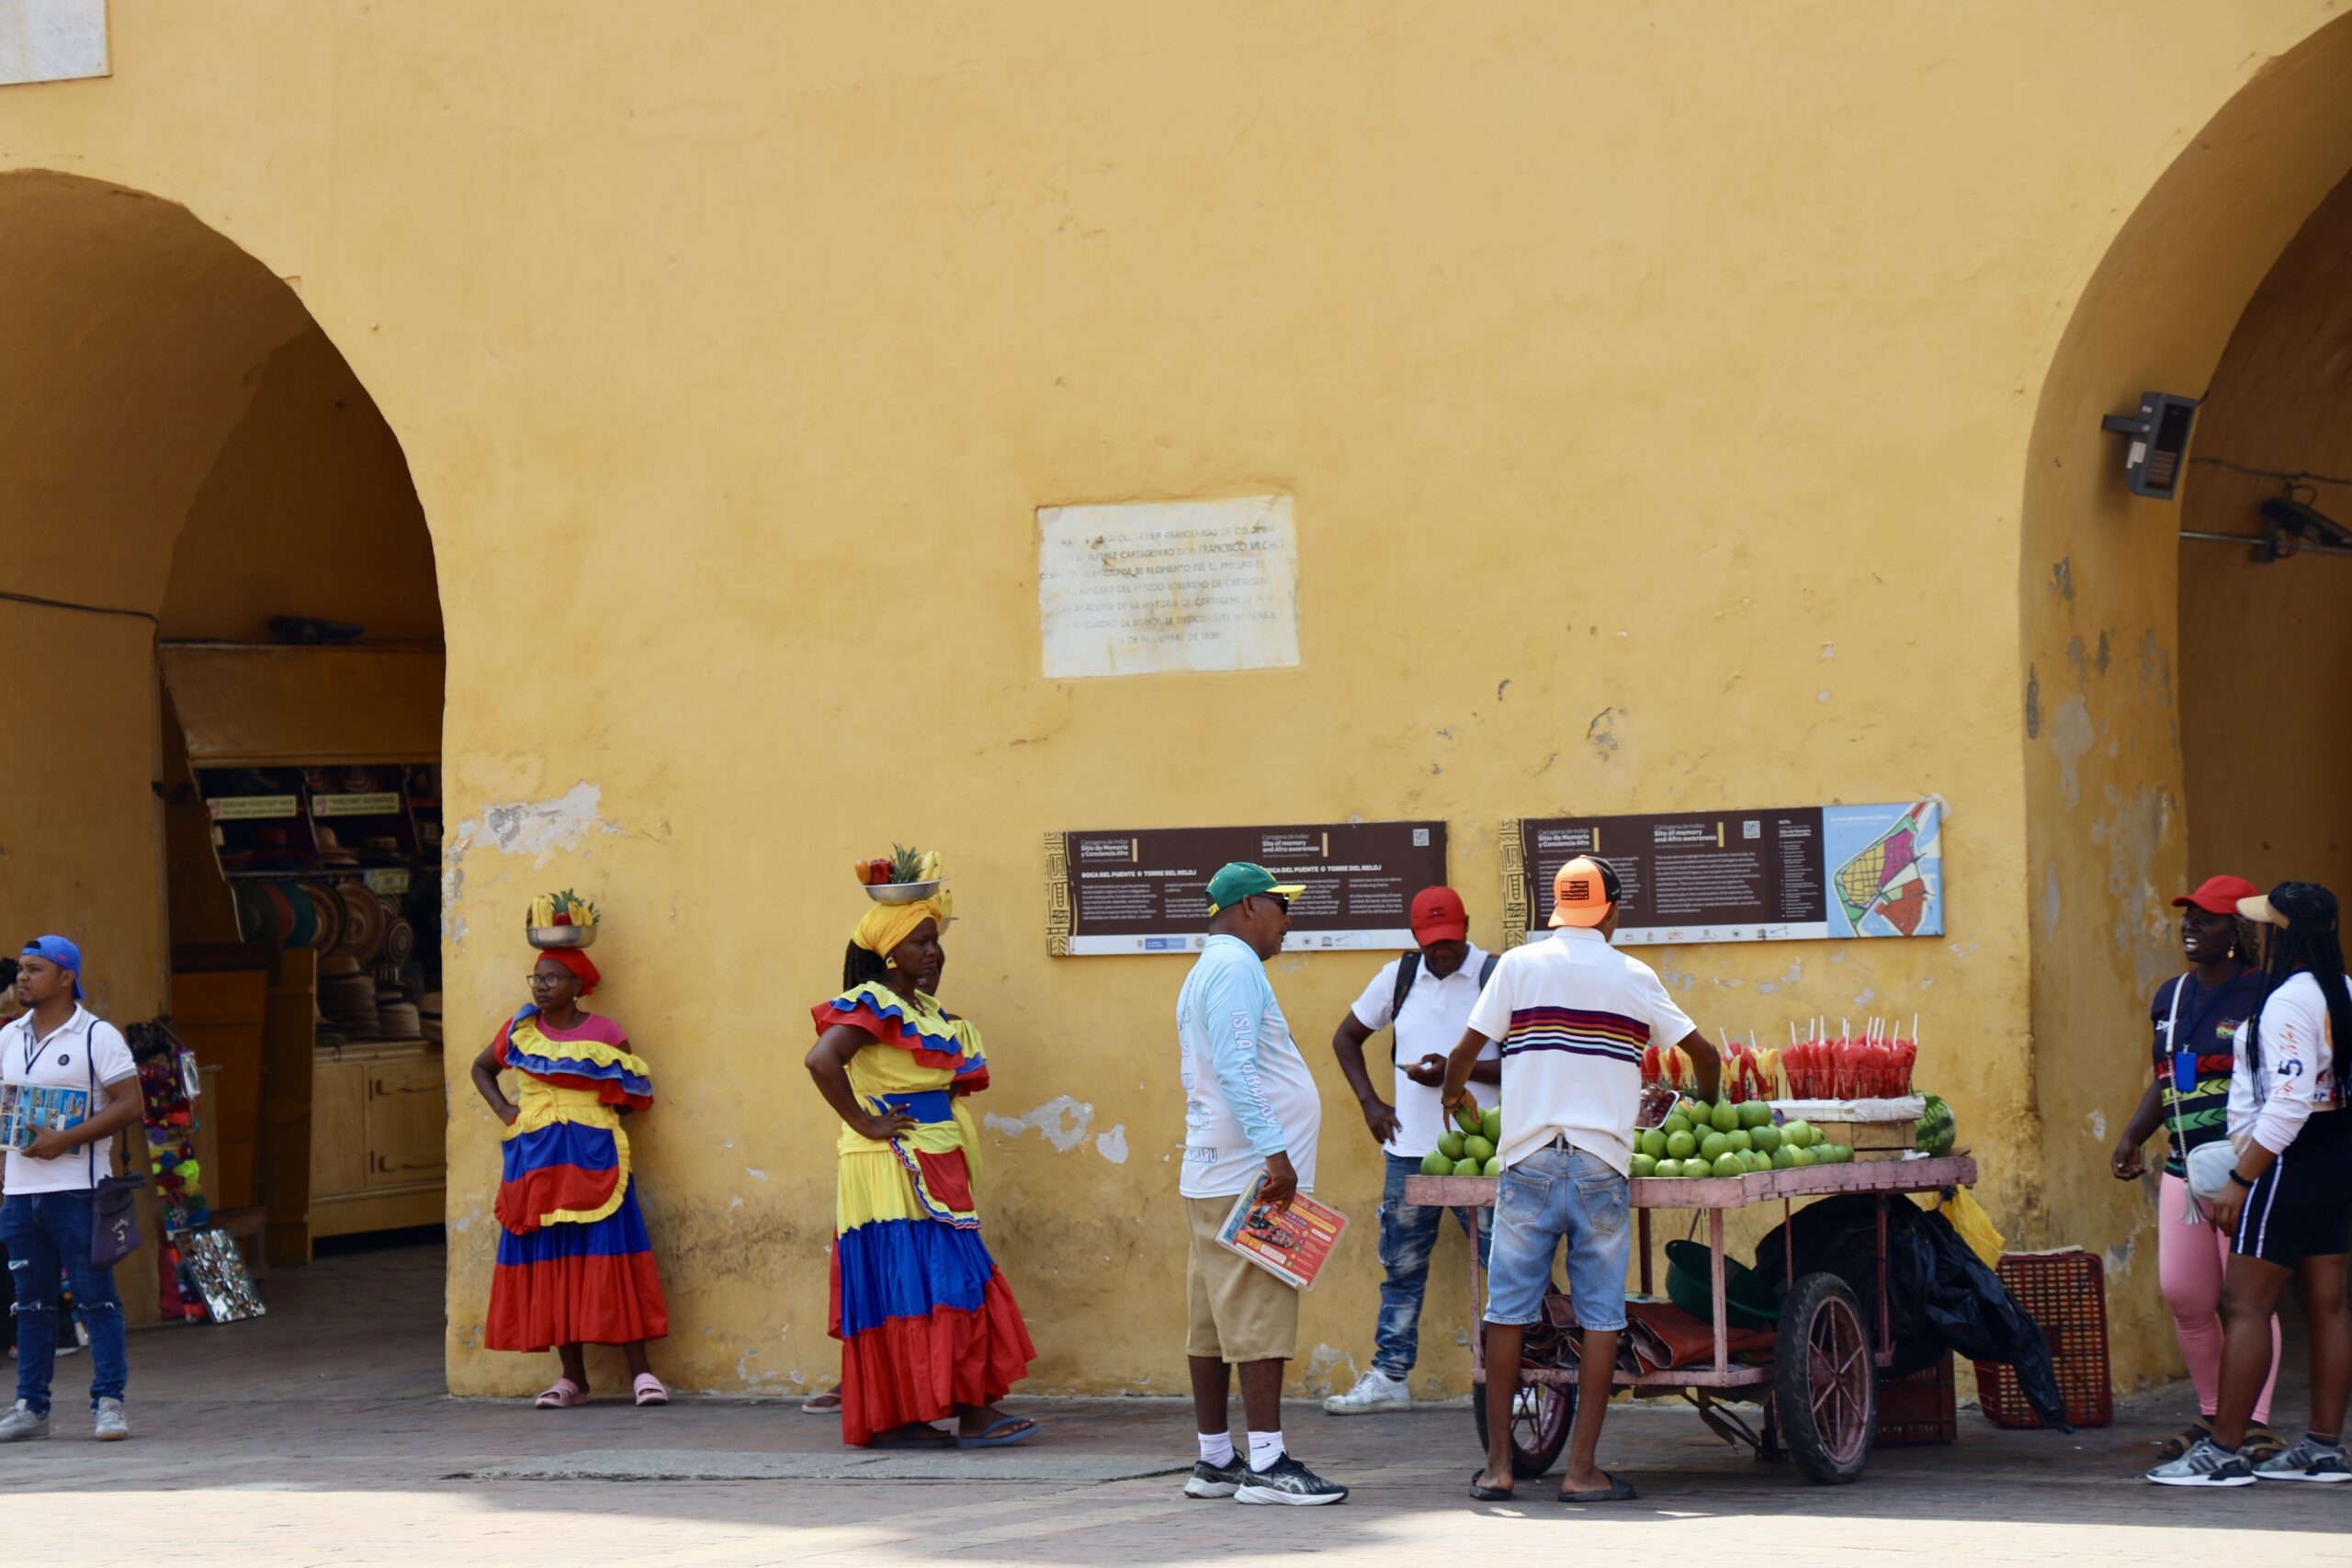 The streets of Cartagena, Colombia